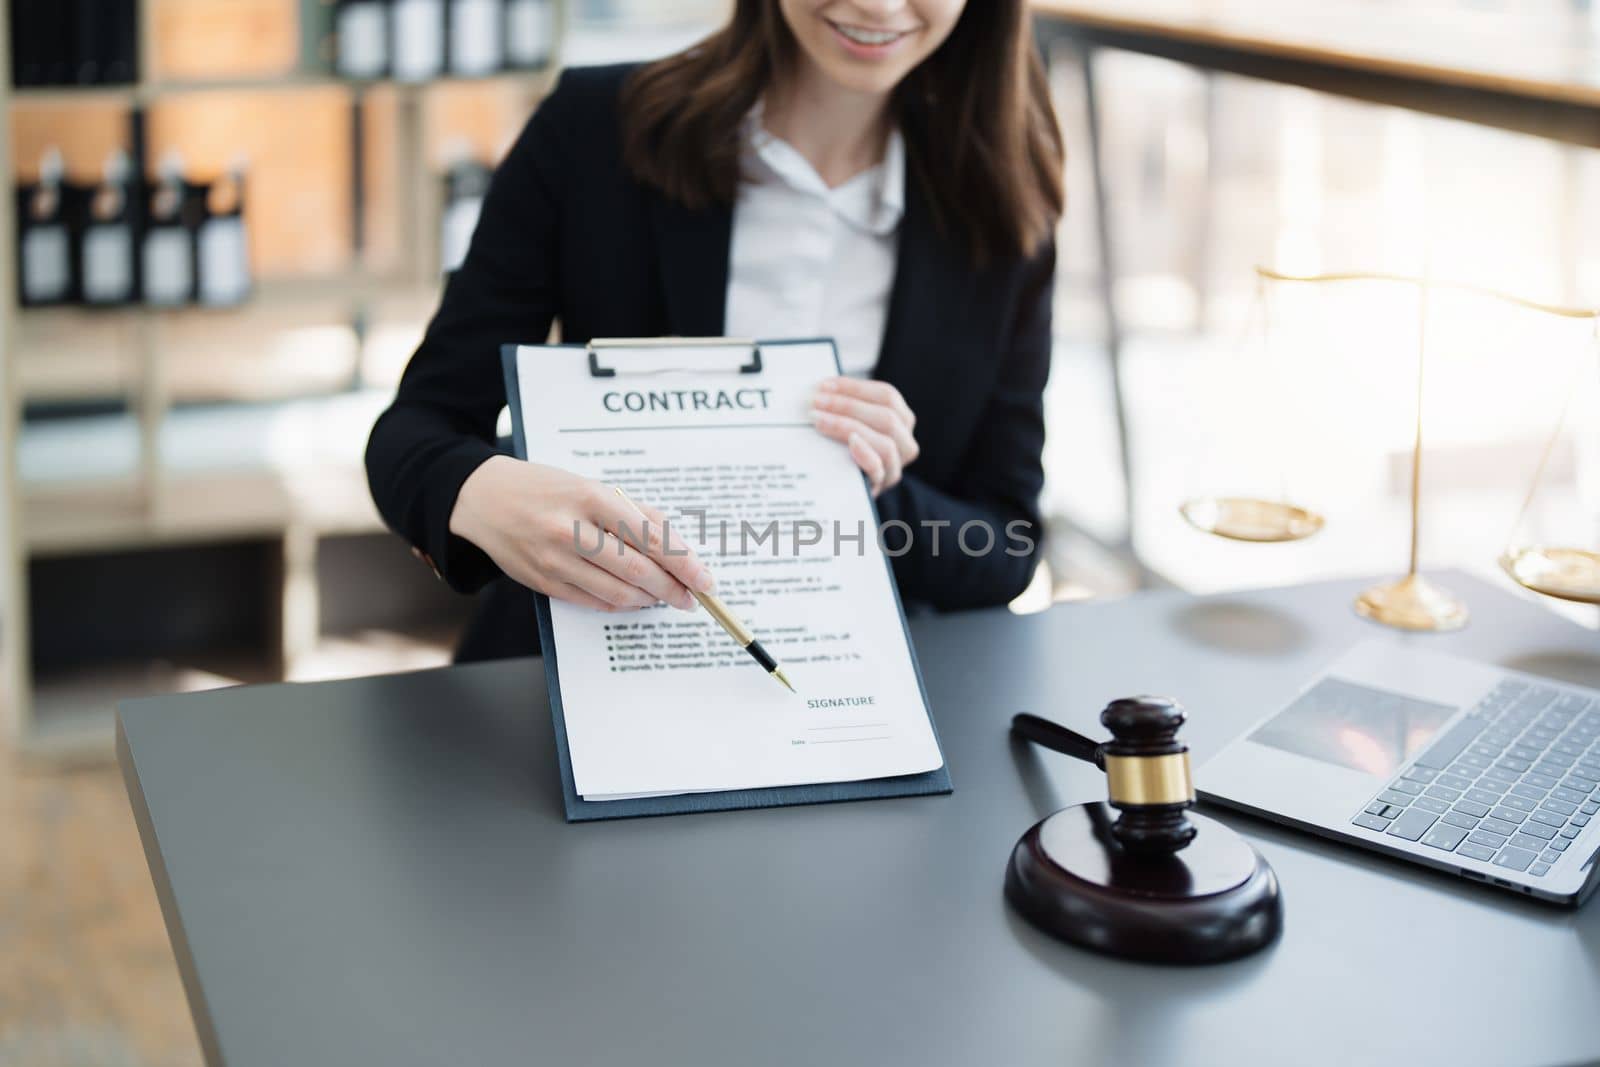 The lawyer with a client discussing contract paper, a Business lawyer working about legal legislation in the courtroom to help their customer, contract and agreement concept. by Manastrong